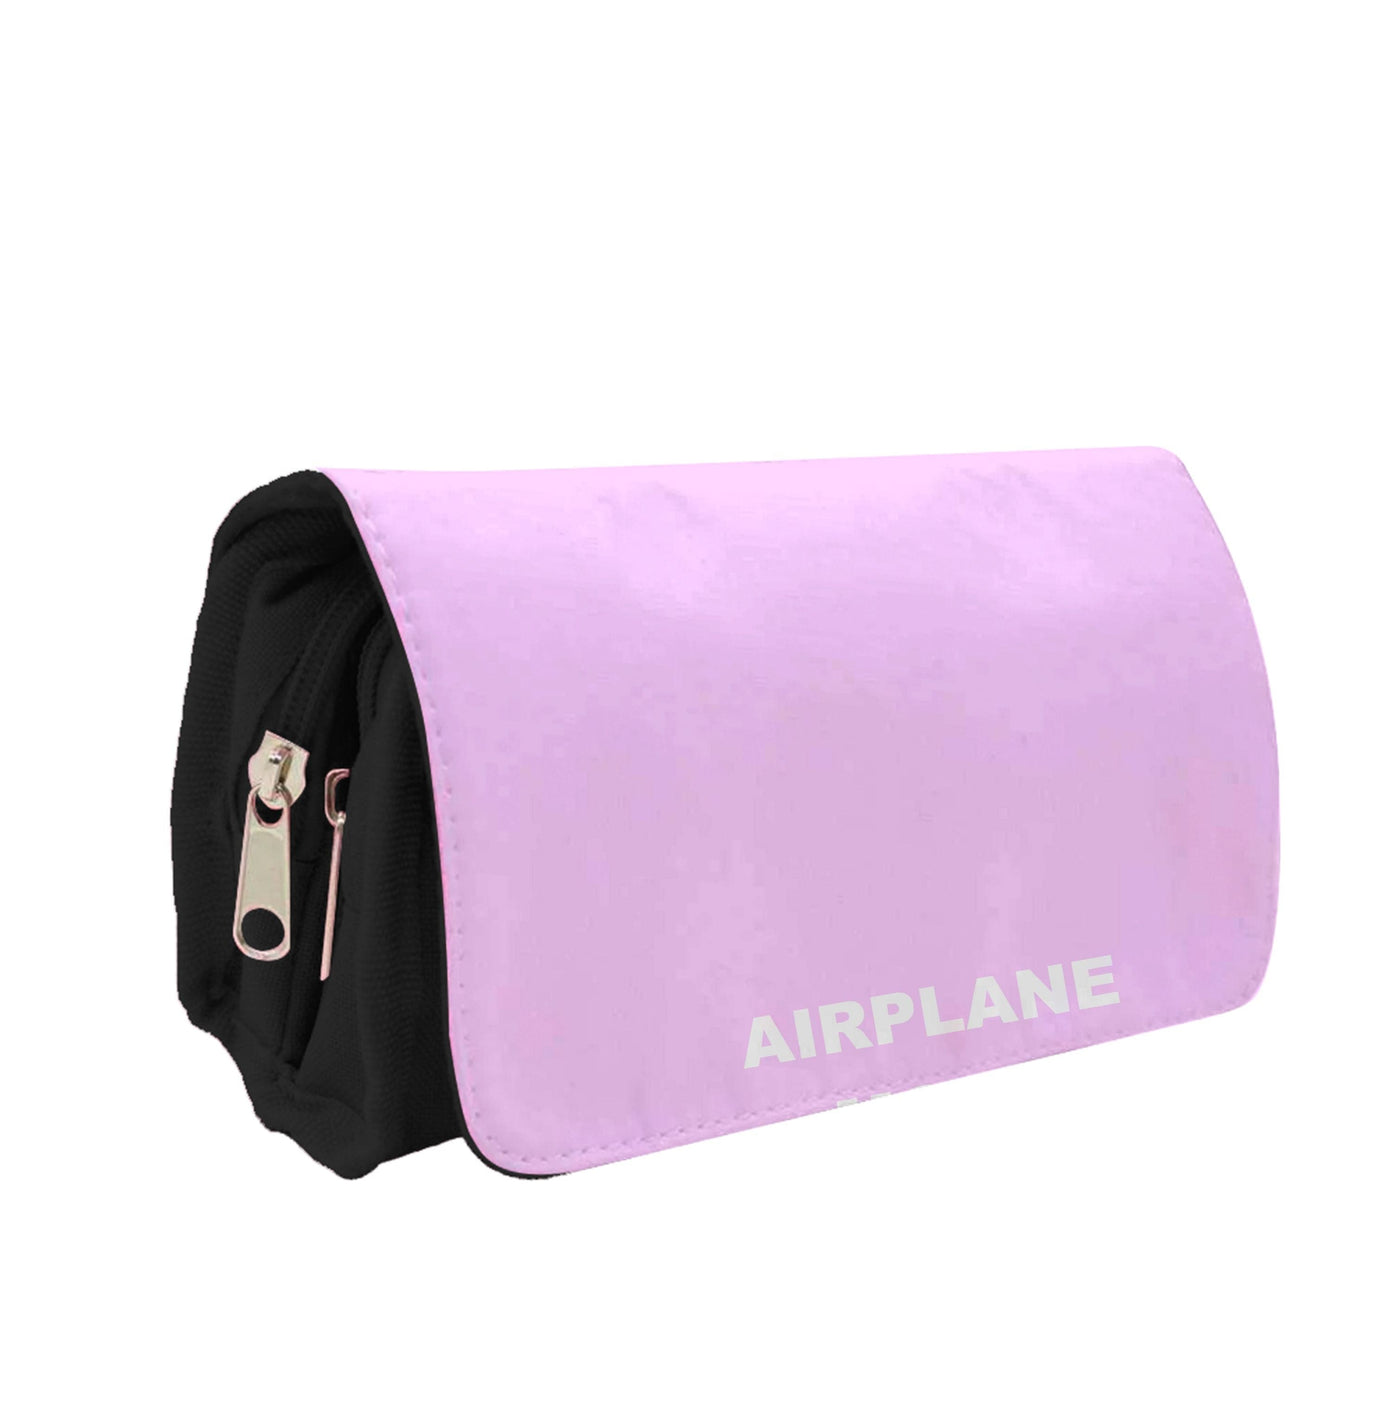 Airplane Mode On - Travel Pencil Case